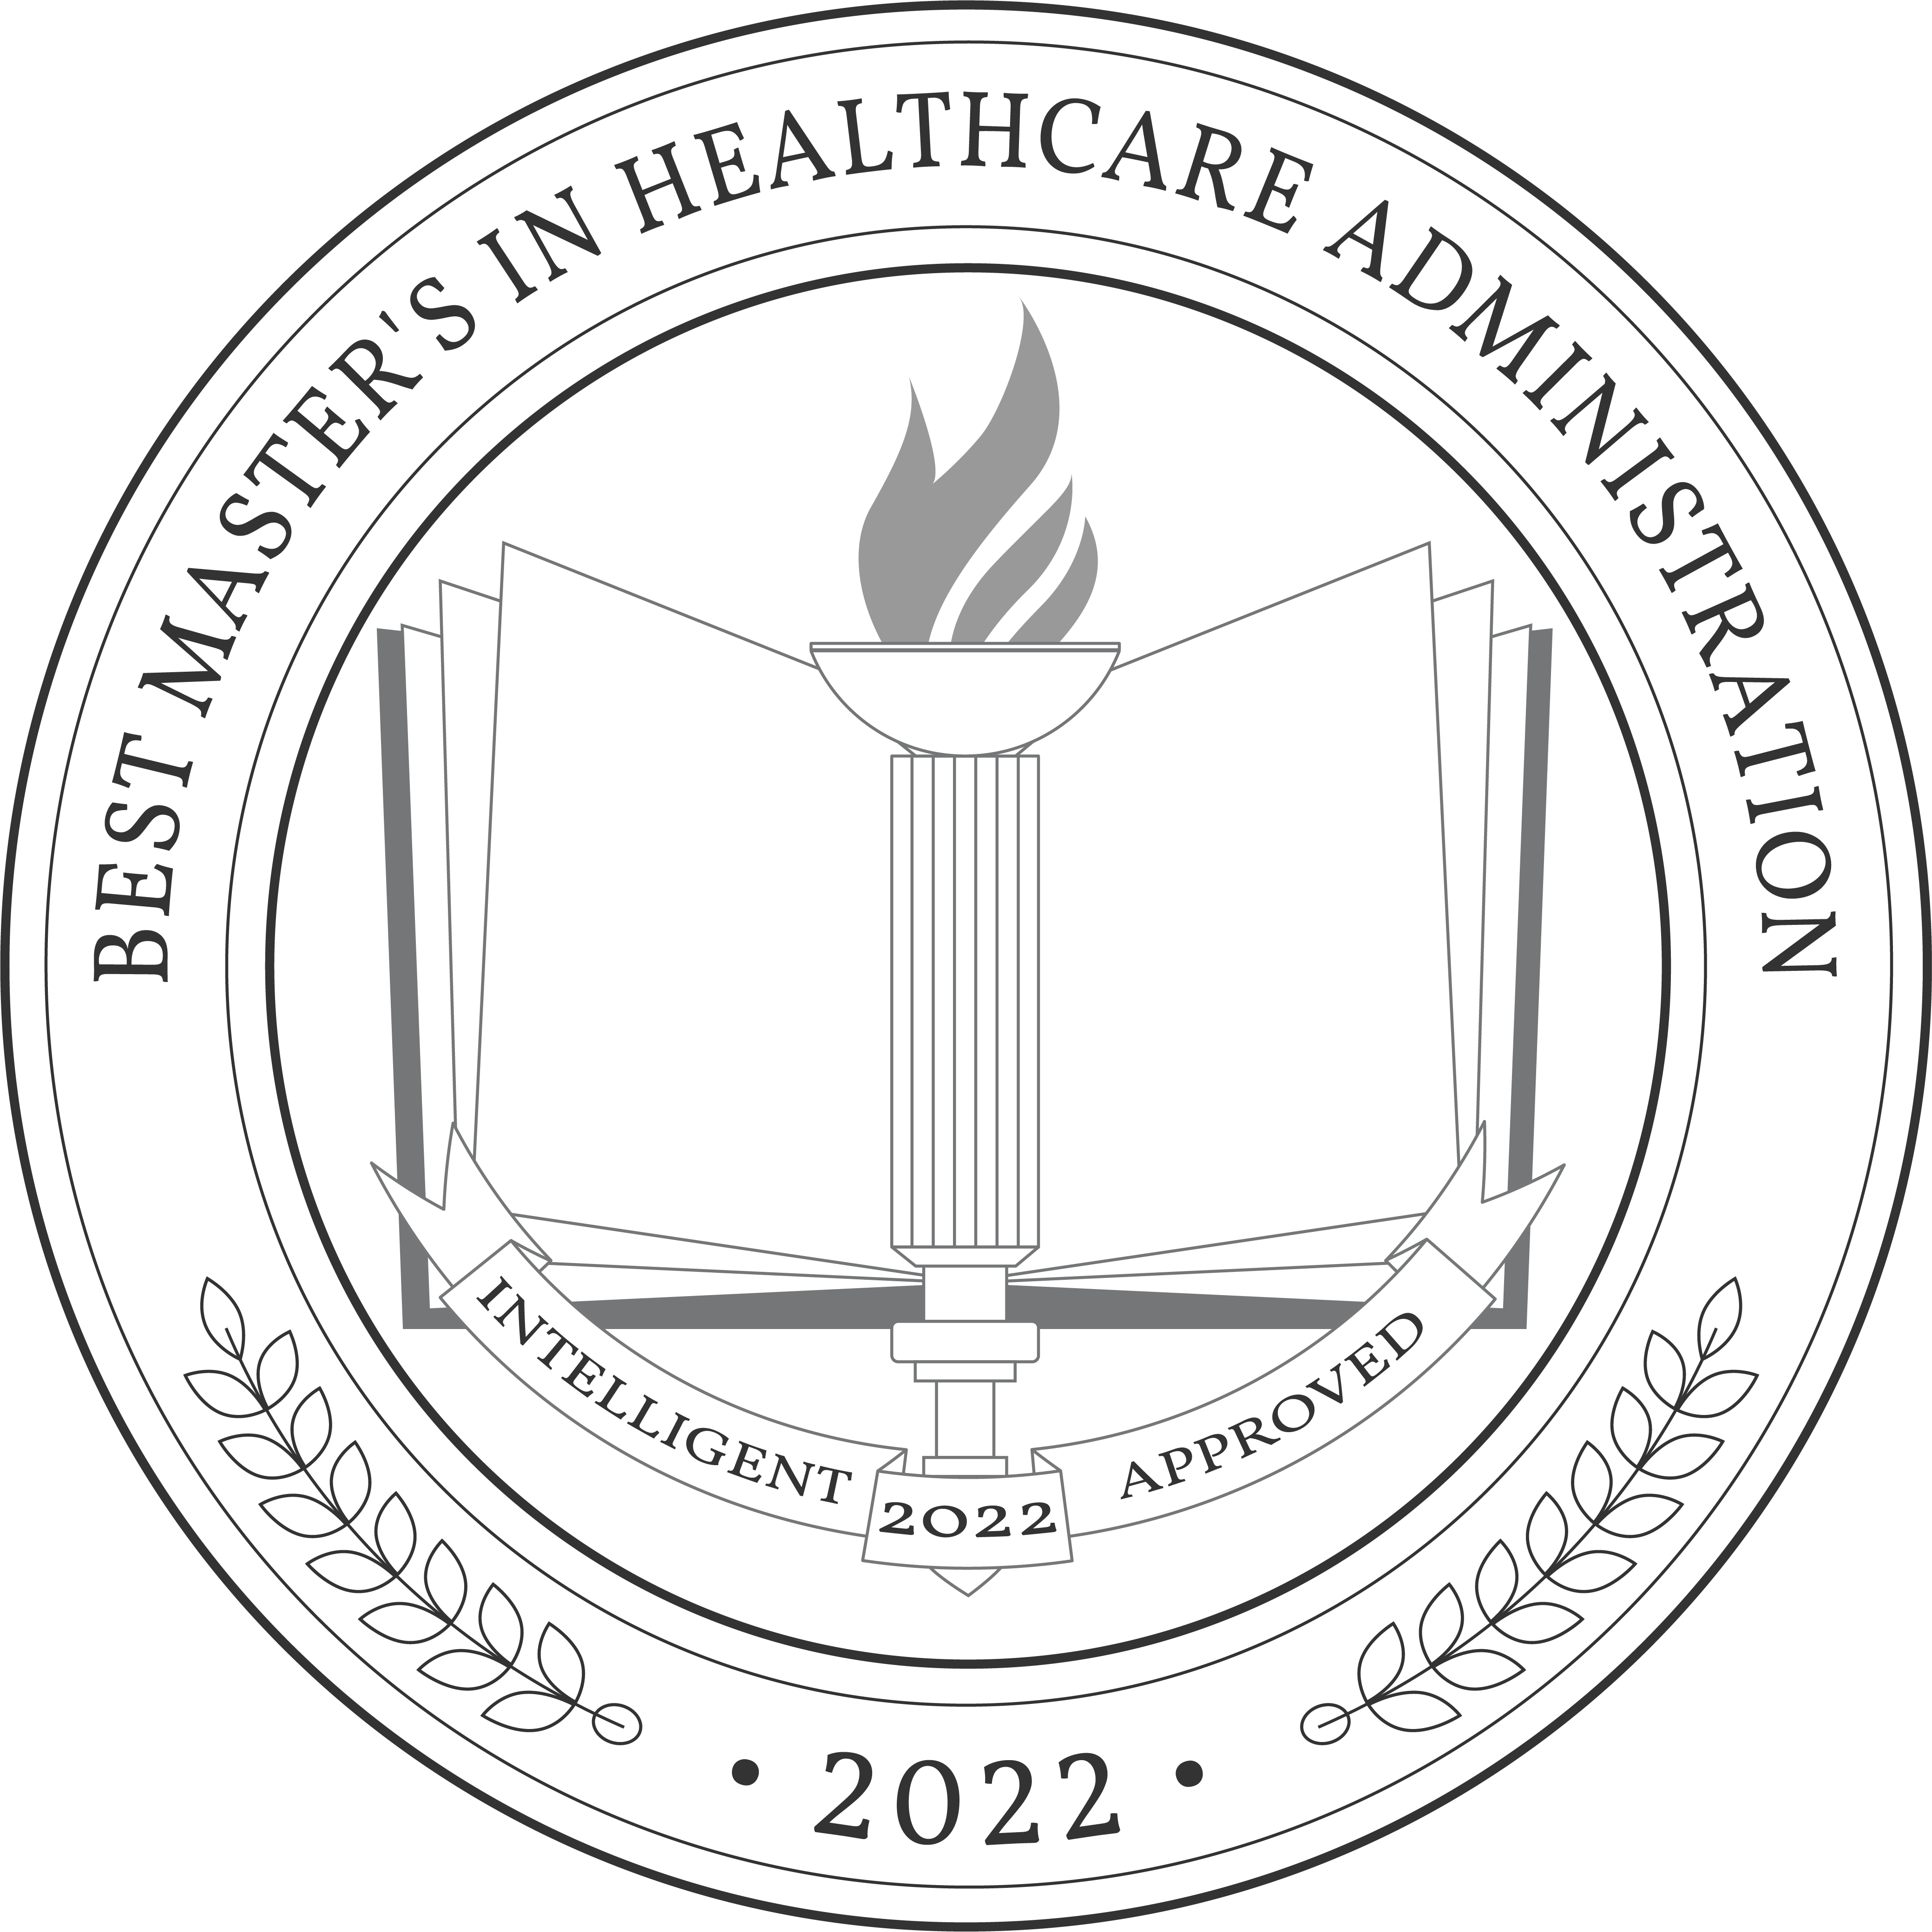 The Best Master's in Healthcare Administration